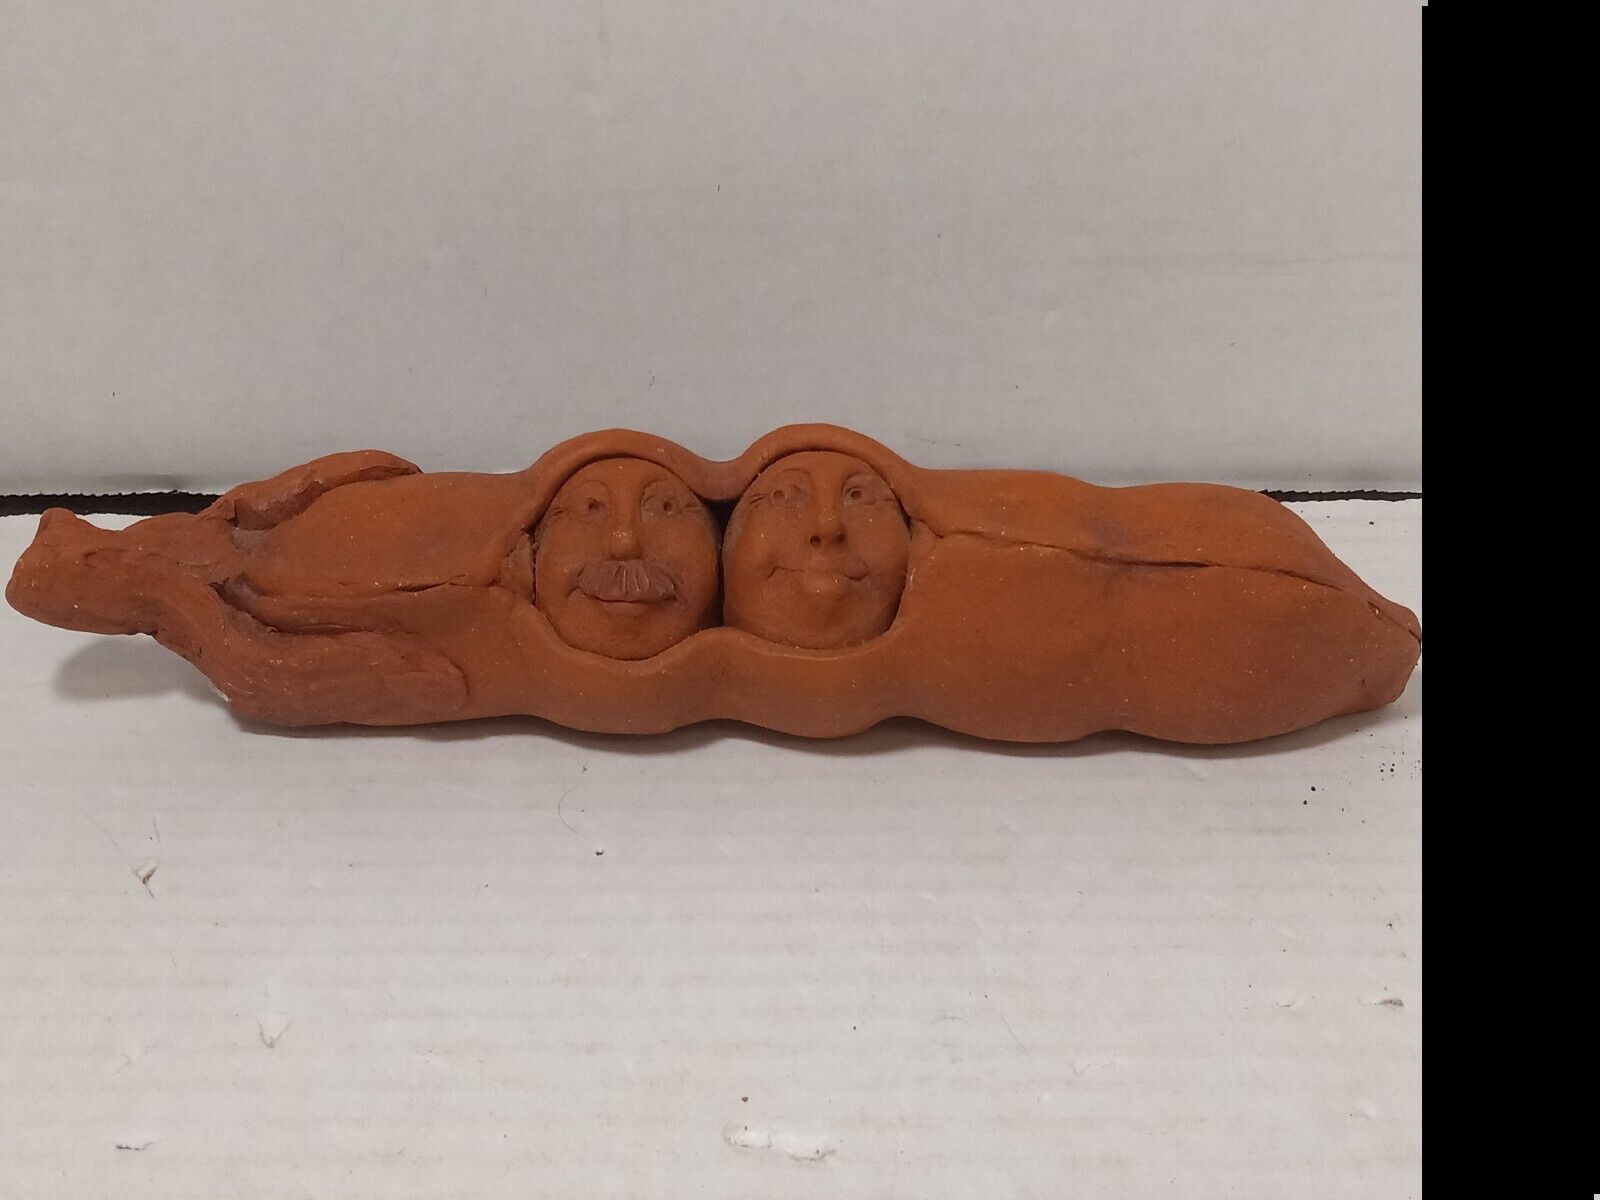 Artisan Handmade Pottery Clay 2 Peas in a Pod Figure Faces Signed